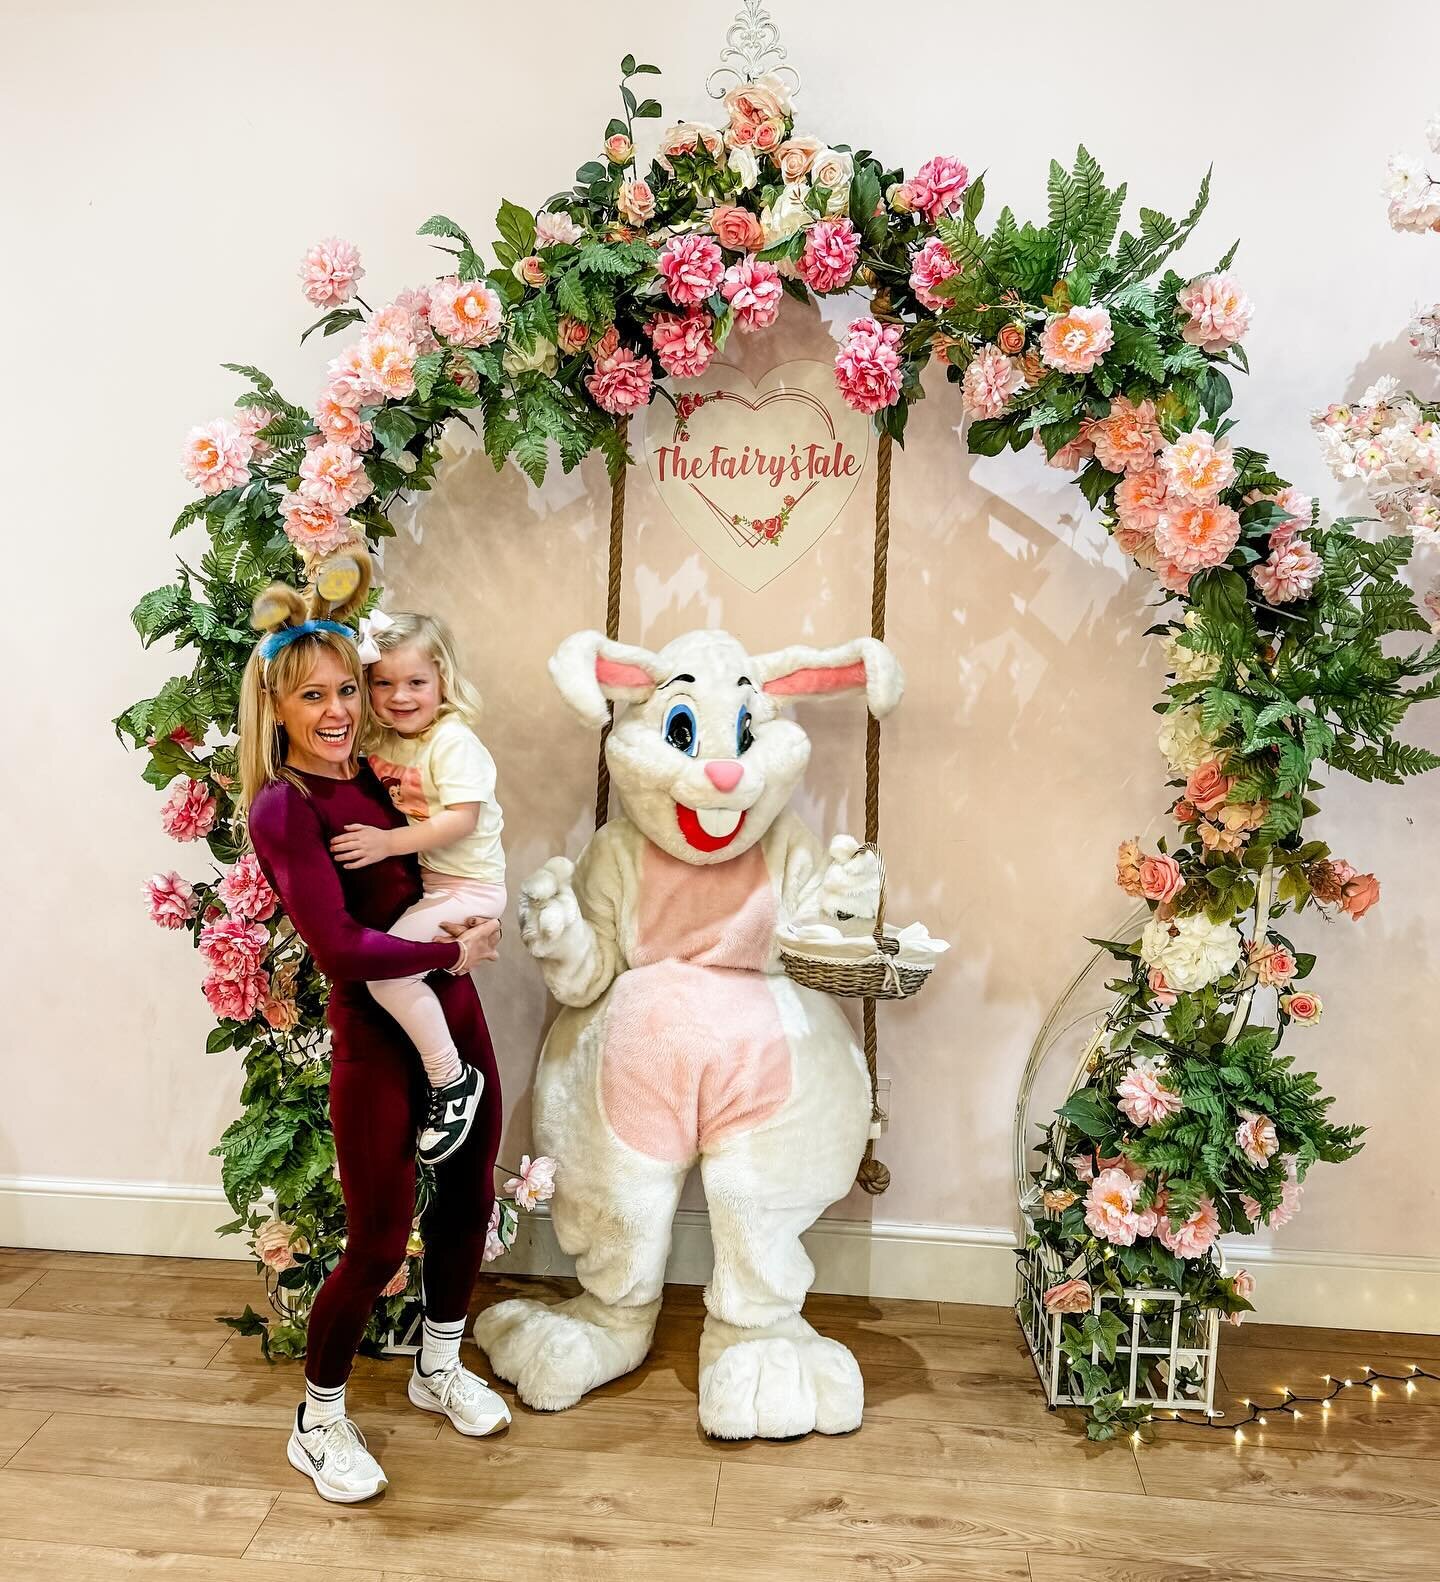 The Easter bunny will be visiting The Fairy&rsquo;s Tale this half term! Book your Easter makeover and visit our bunny now: https://thelittleboxoffice.com/enchantedevents4kids/
Link in bio 🐰

#easterevent #easterbunny #visittheeasterbunny #eastermak